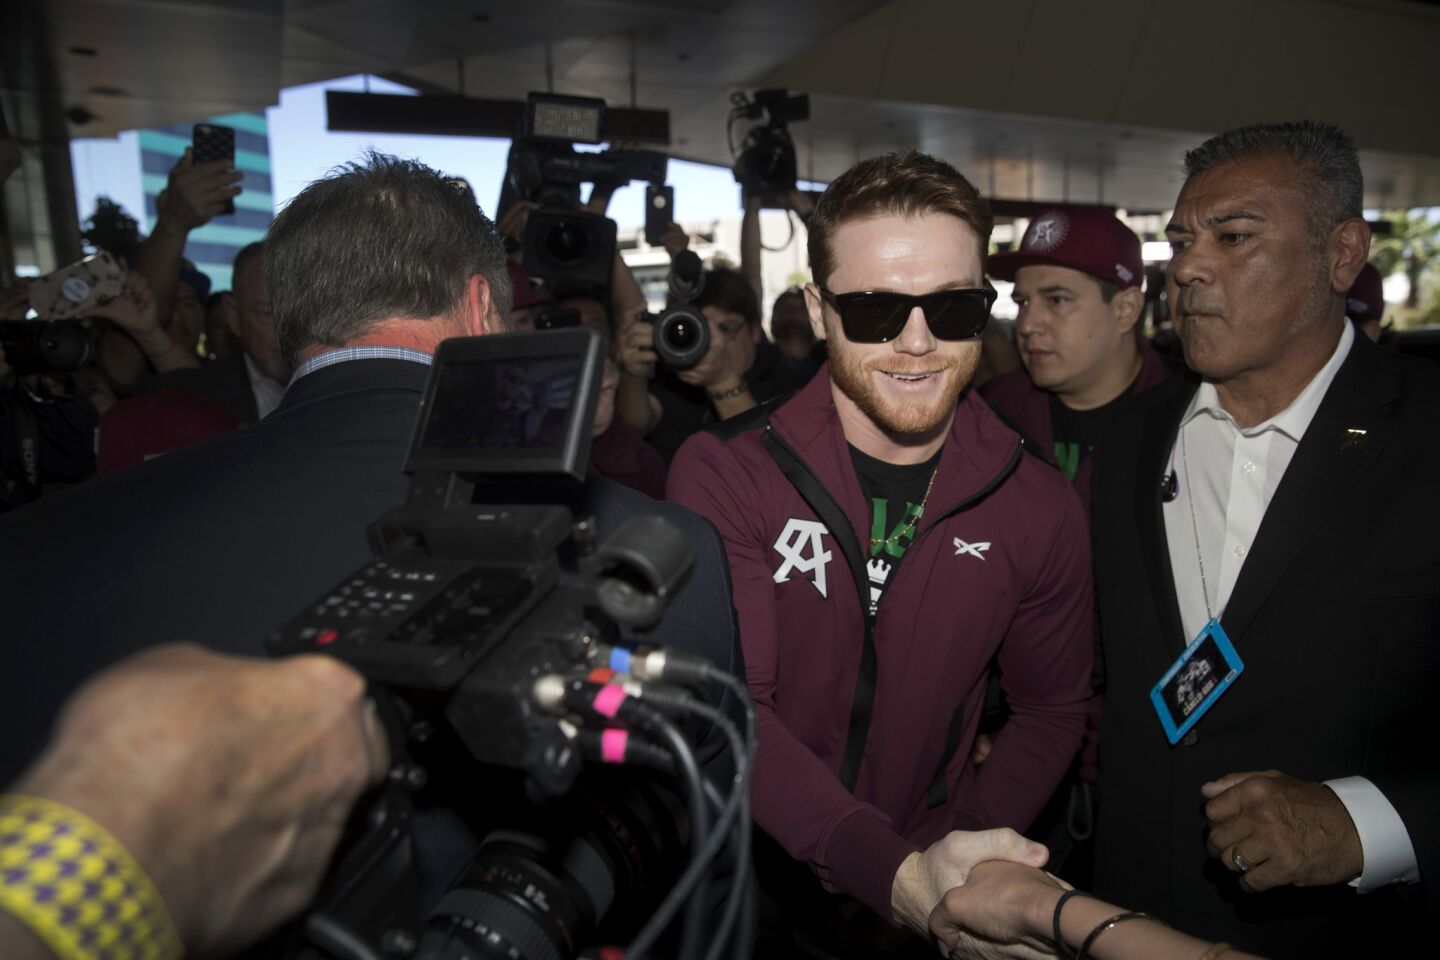 Middleweight boxer Canelo Alvarez of Mexico greets a fan as he arrives at the MGM Grand hotel-casino in Las Vegas Tuesday, Sept. 11, 2018. Alvarez will challenge WBC/WBA middleweight champion Gennady Golovkin of Kazakhstan in a rematch at T-Mobile Arena in Las Vegas on Sept. 15. (Steve Marcus/Las Vegas Sun via AP)